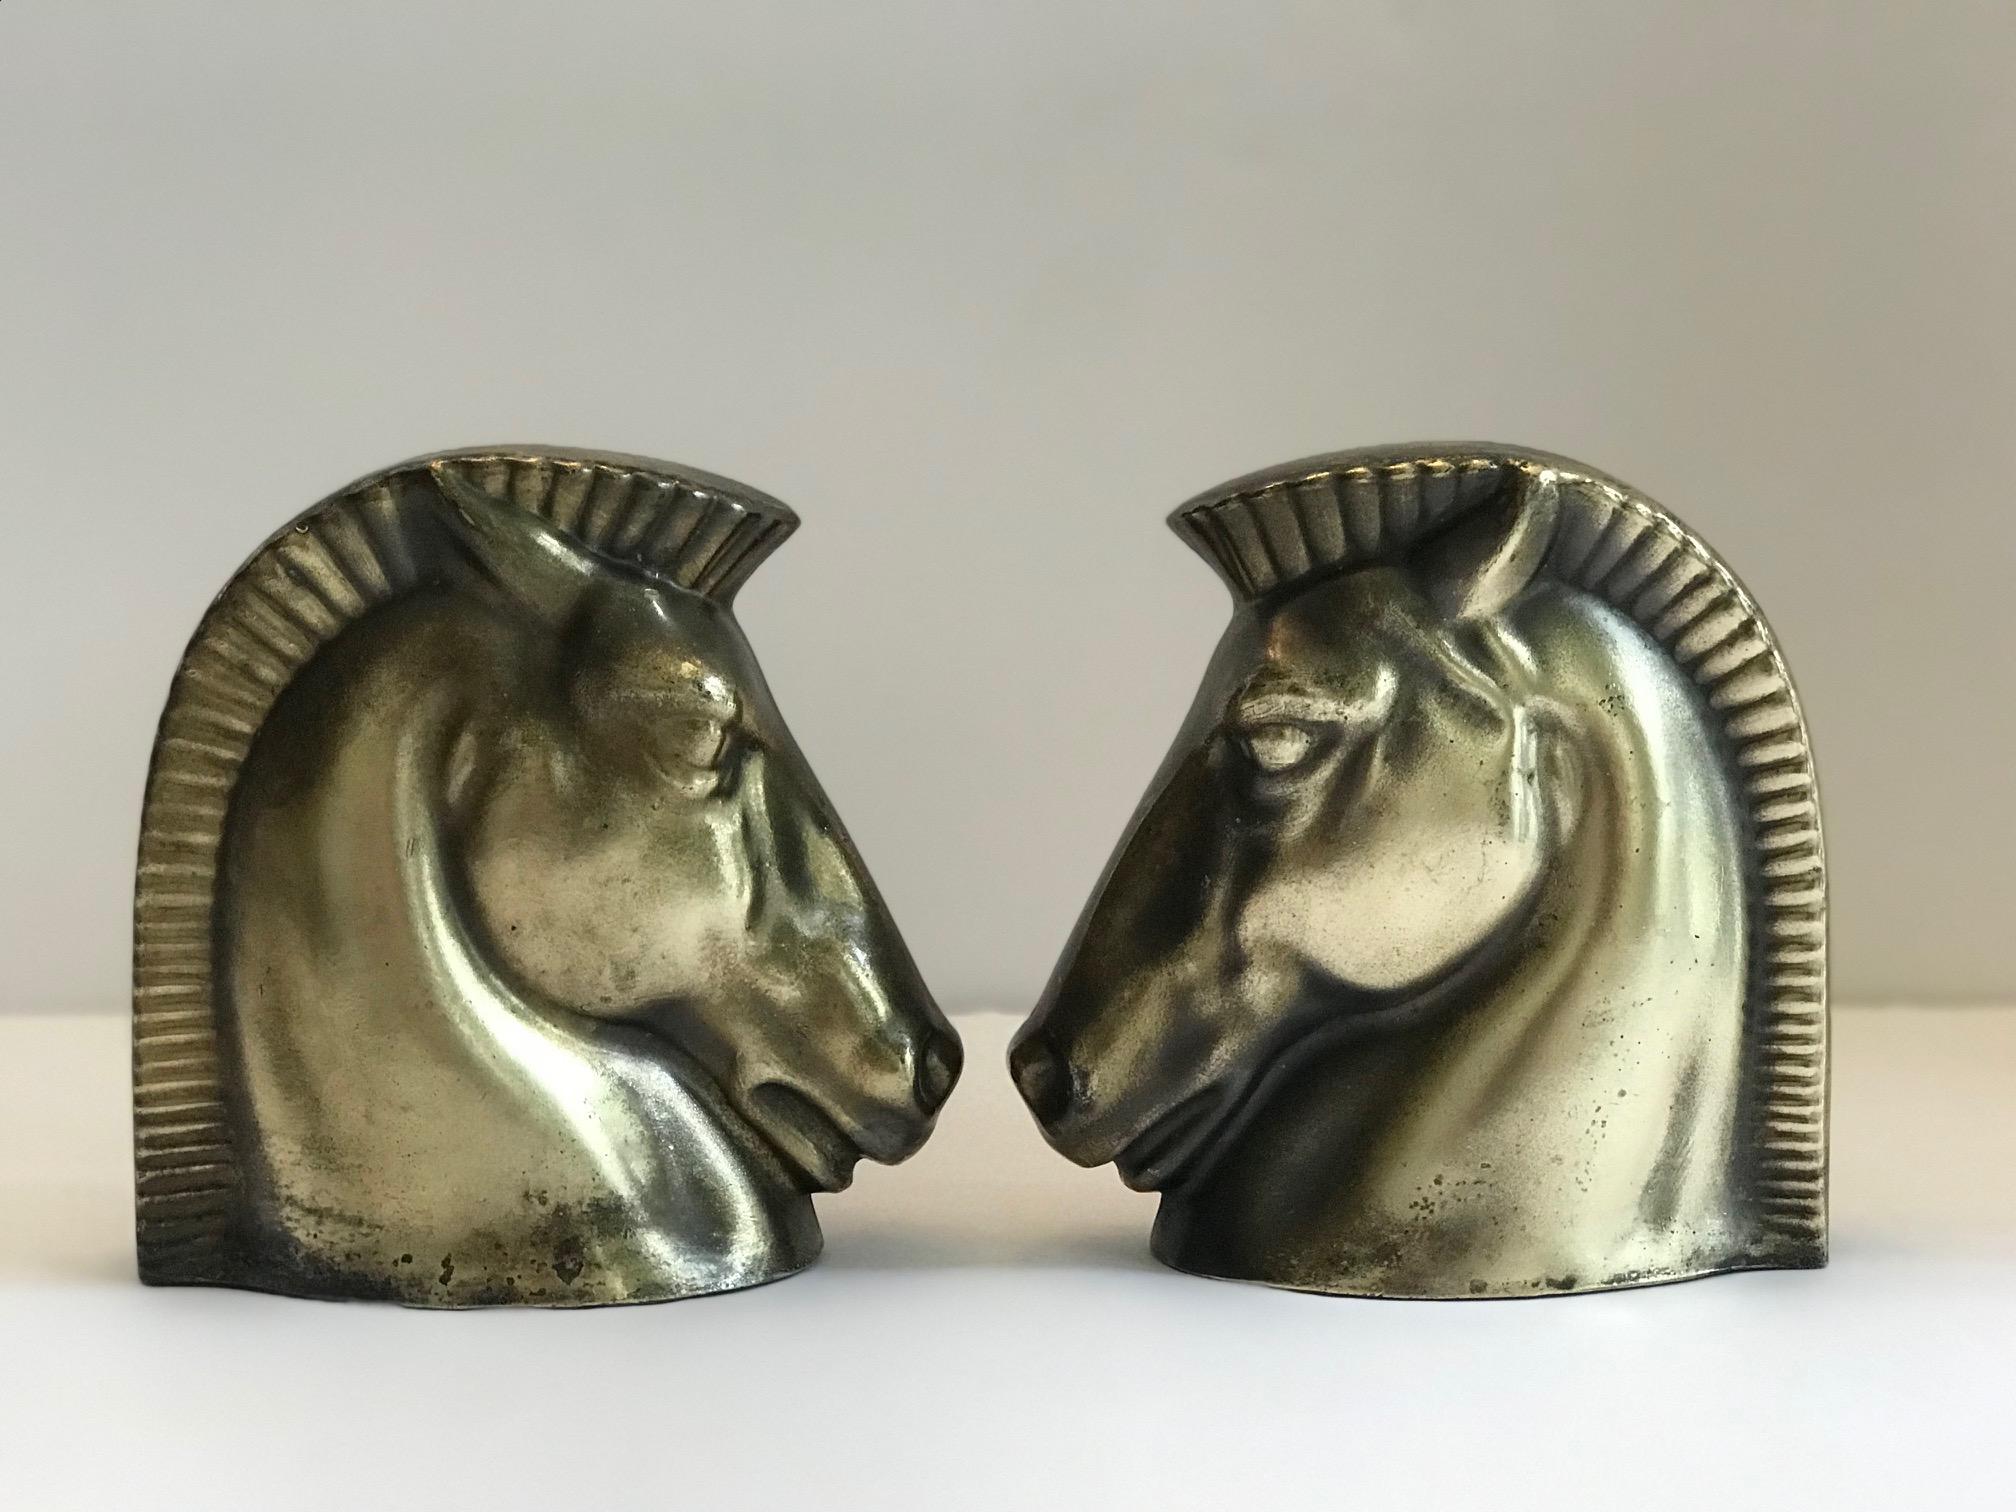 Forged Pair of Art Deco Brass Plated Trojan Horse Bookends by Frankart